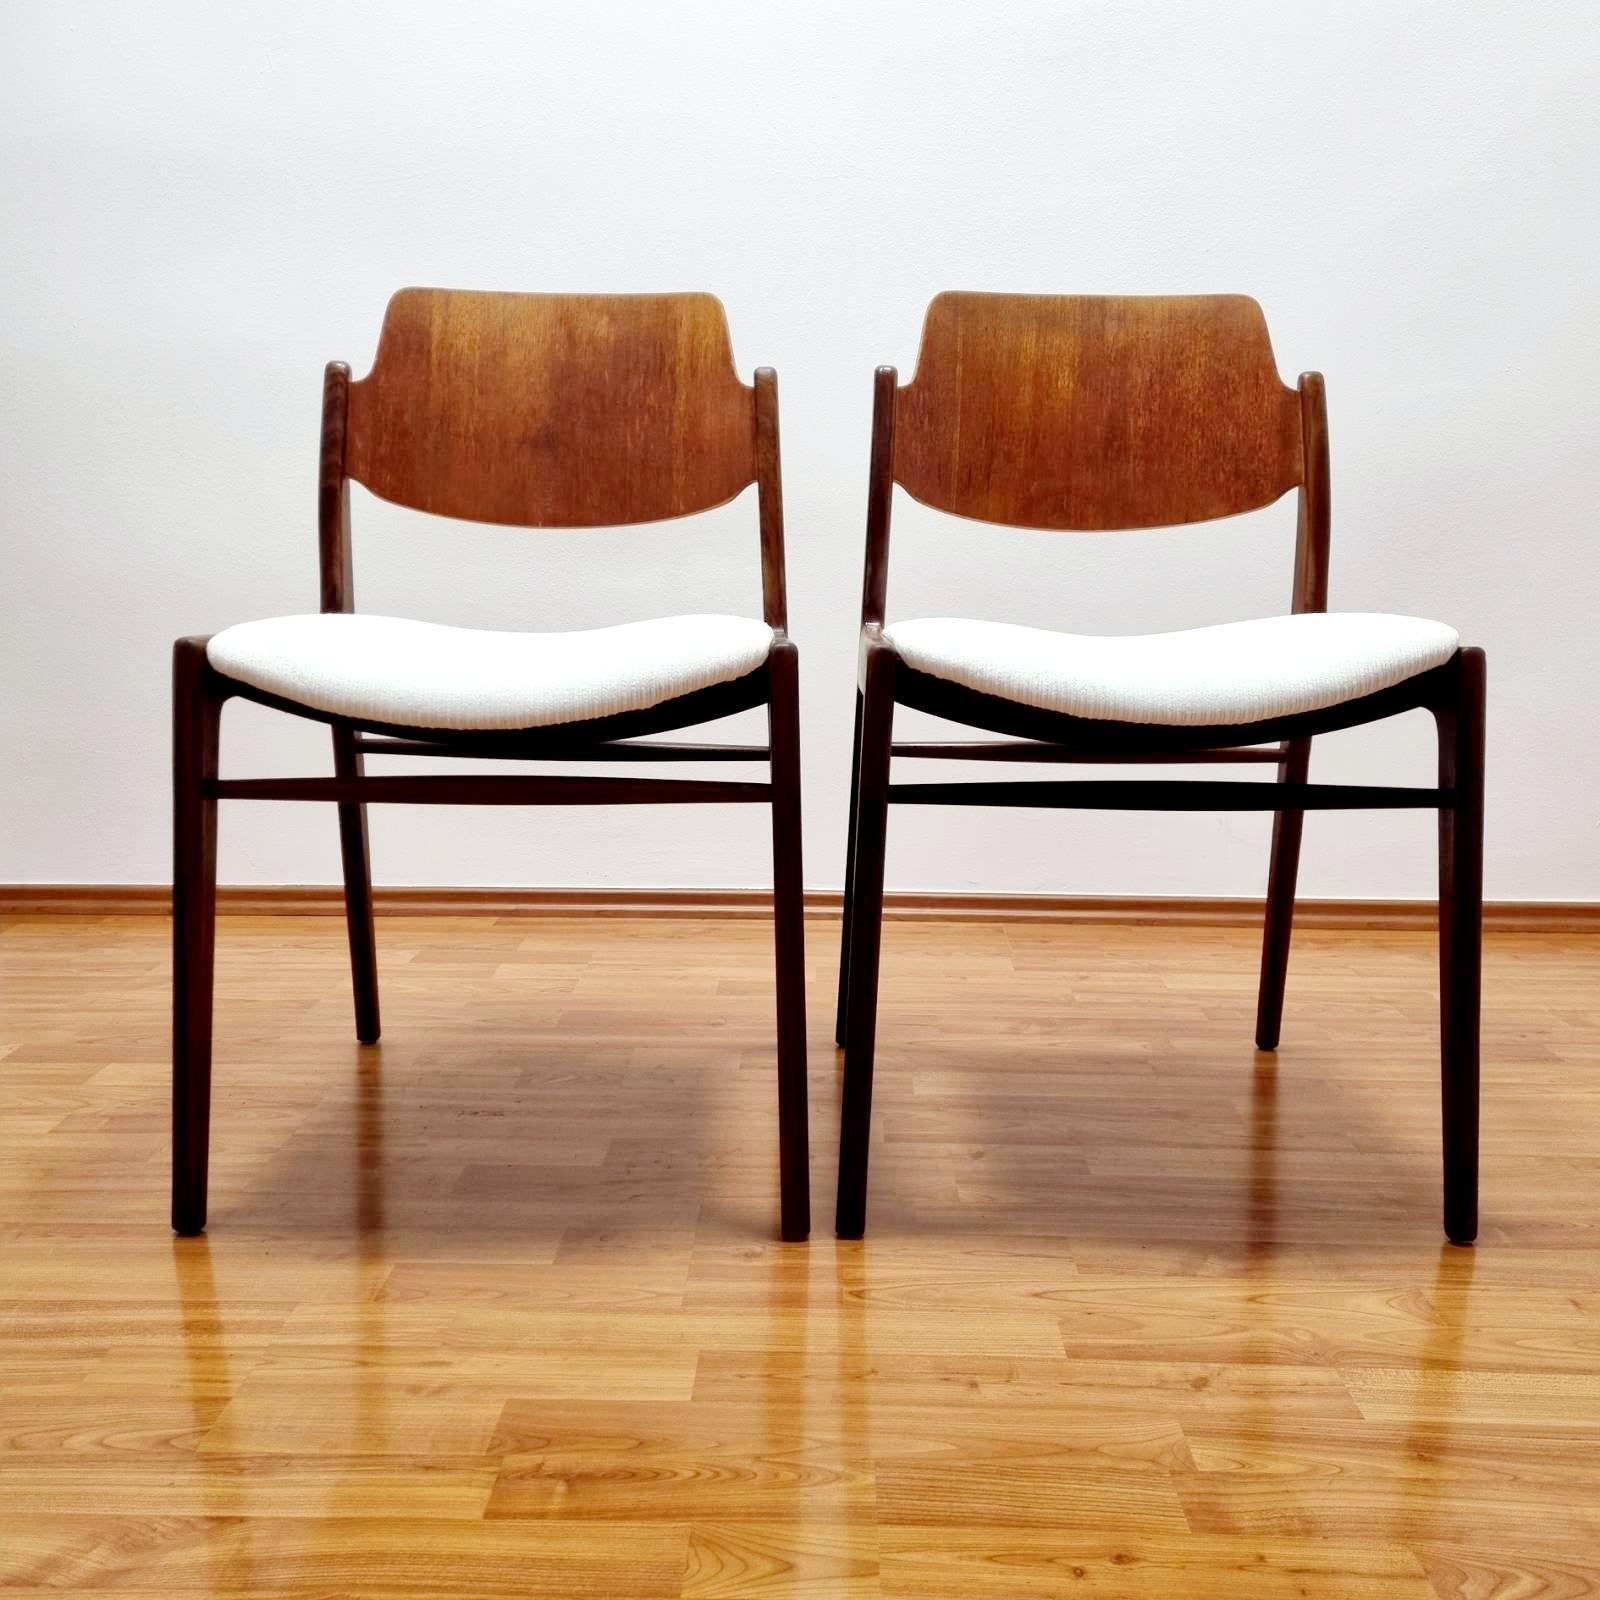 Mid-20th Century Dining Chairs By Hartmut Lohmeyer For Wilkhahn, Germany 60s For Sale